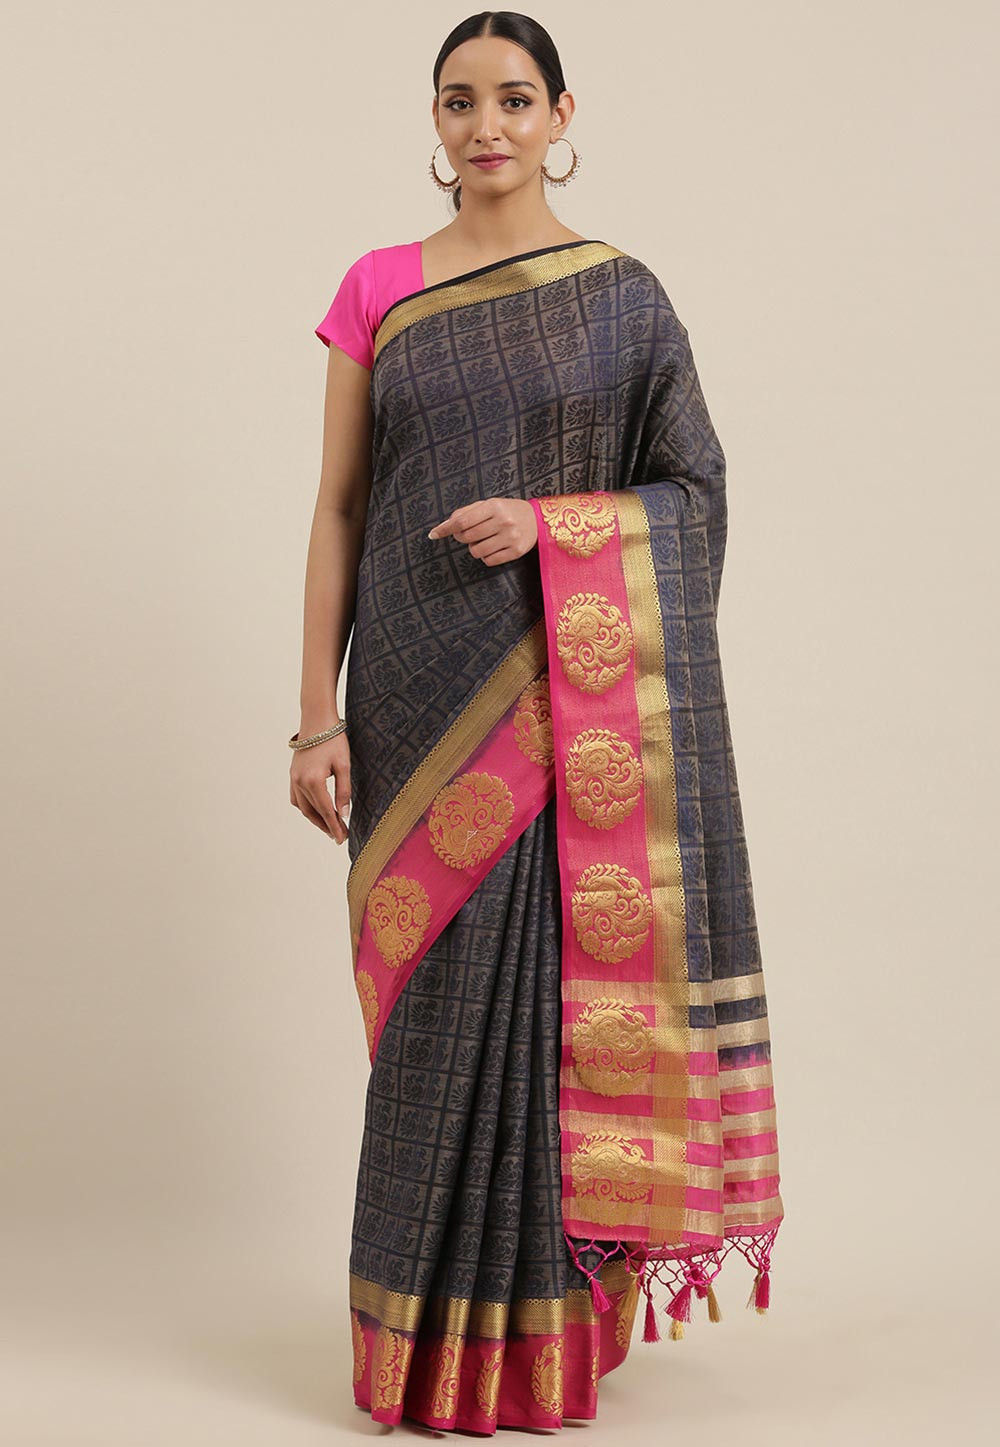 The Ultimate Collection of Full 4K Mysore Silk Sarees Images - Top 999+